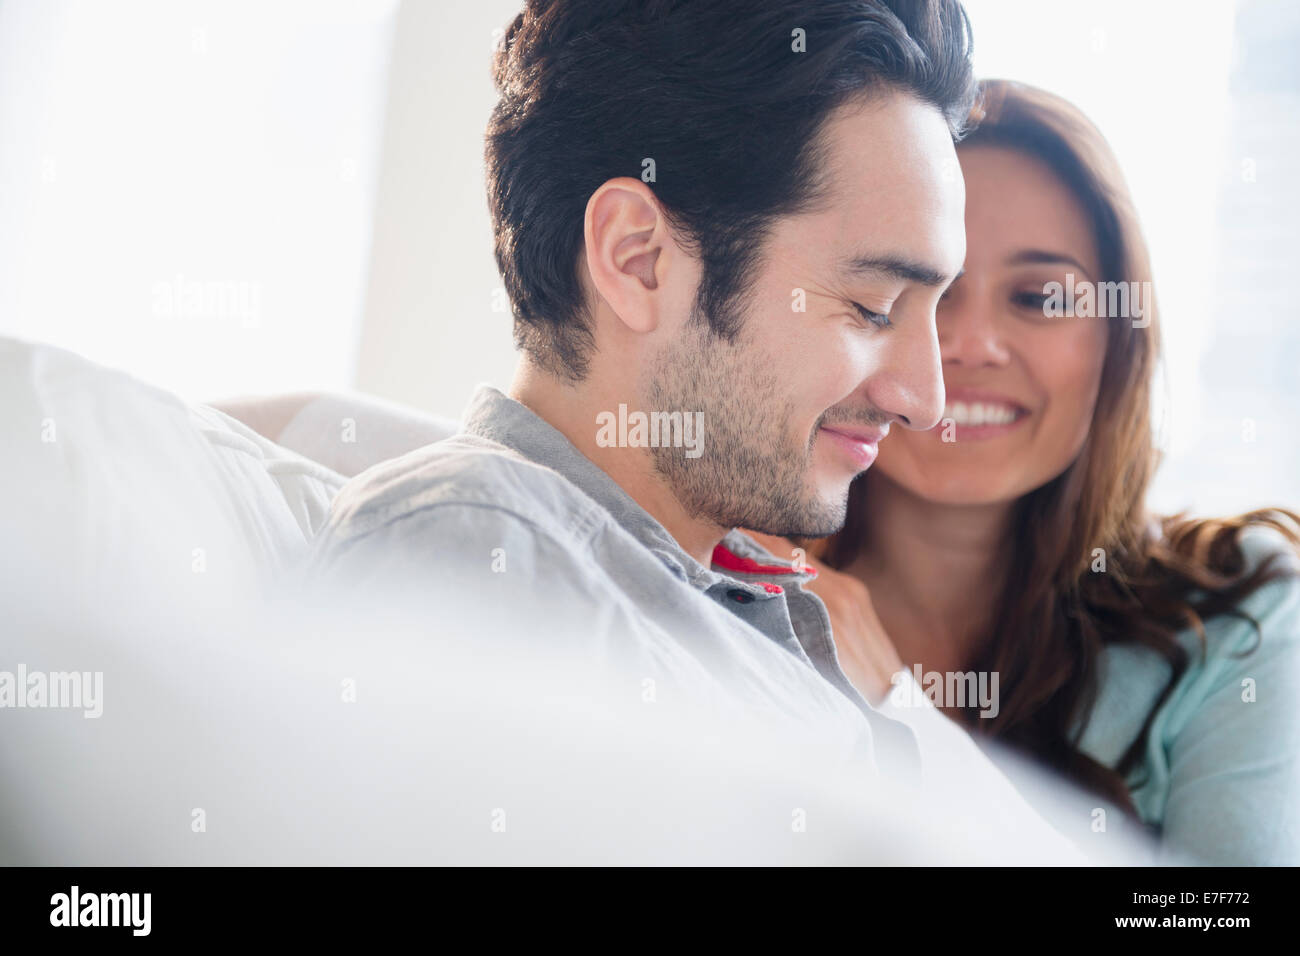 Couple smiling together on sofa Banque D'Images